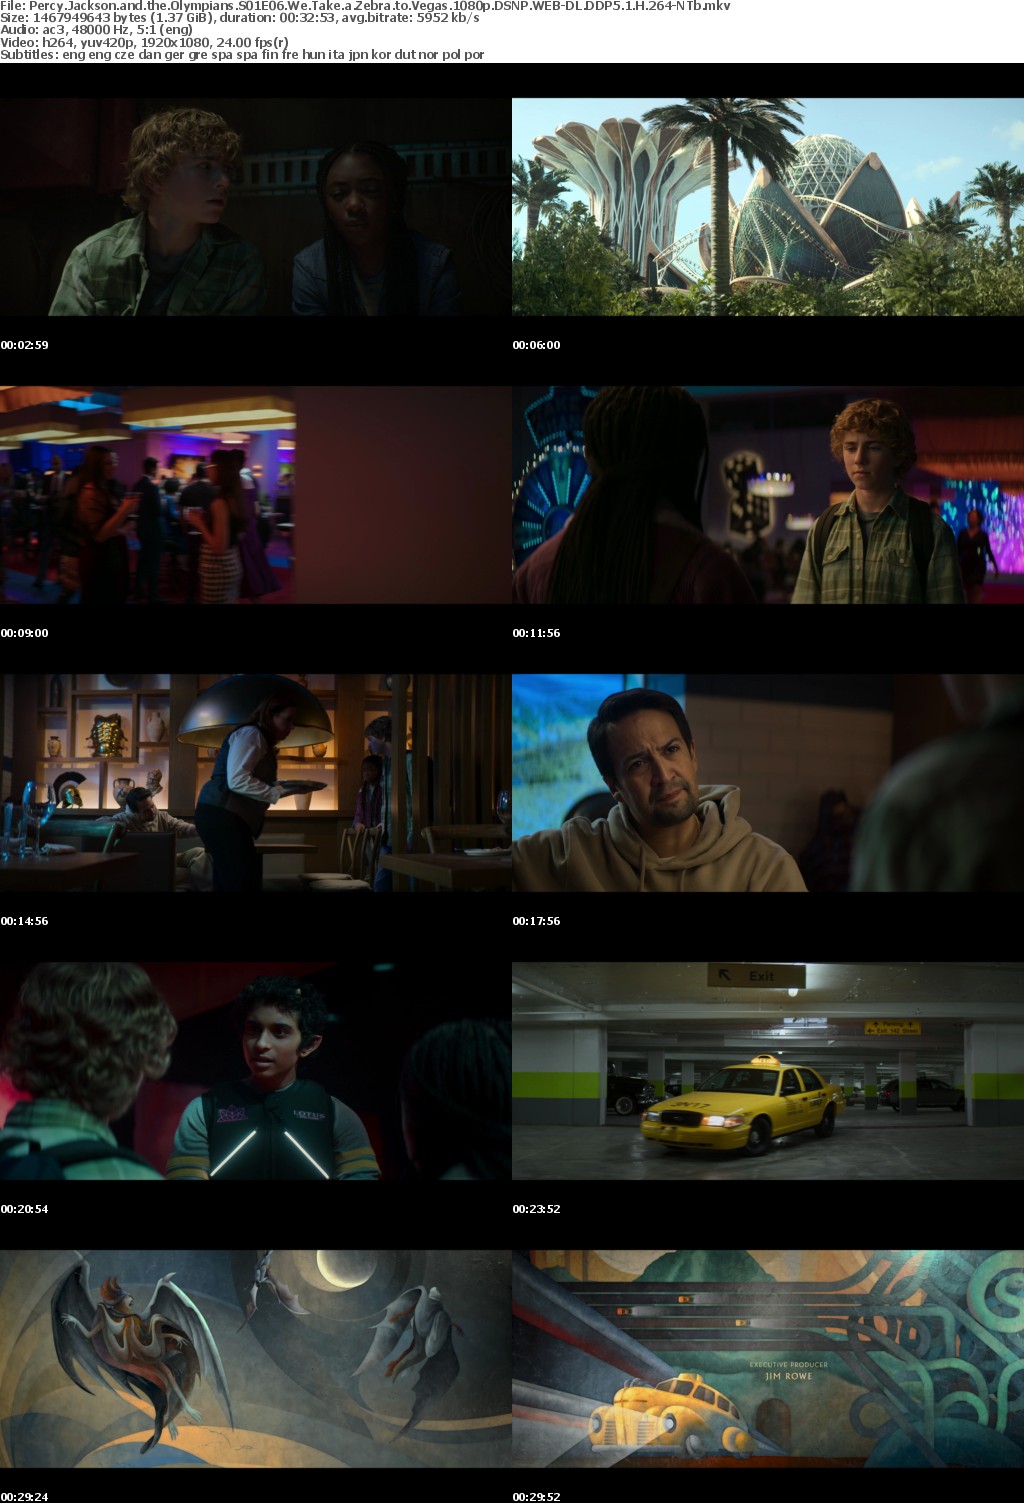 Percy Jackson and the Olympians S01E06 We Take a Zebra to Vegas 1080p DSNP WEB-DL DDP5 1 H 264-NTb